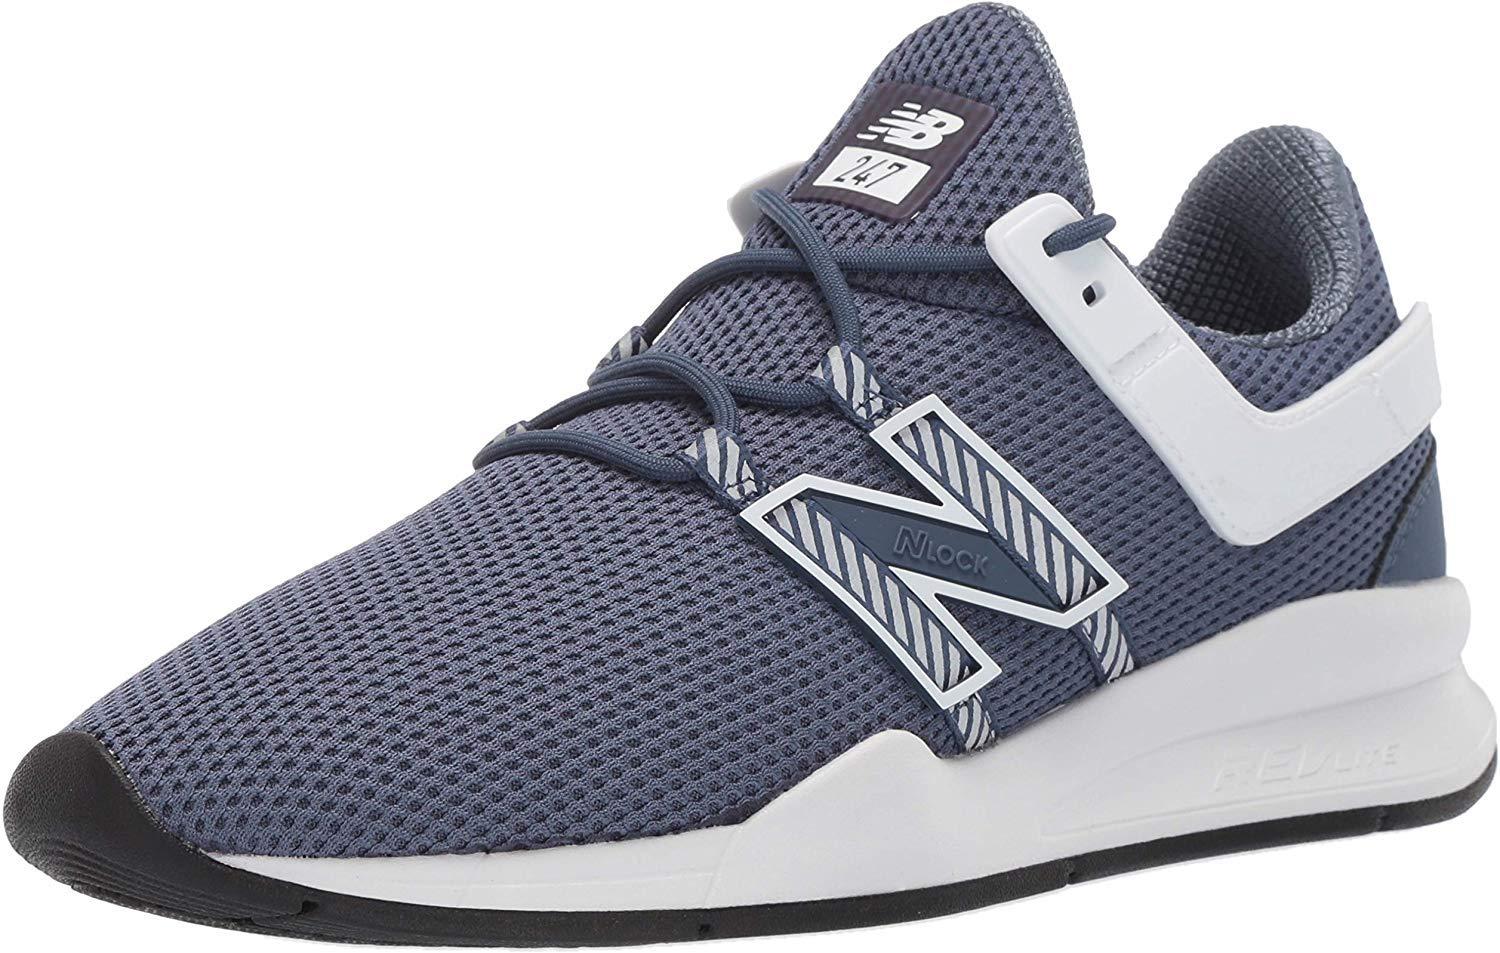 New Balance Synthetic 247v1 Deconstructed Sneaker in Vintage Indigo/White  (Blue) for Men - Save 7% - Lyst